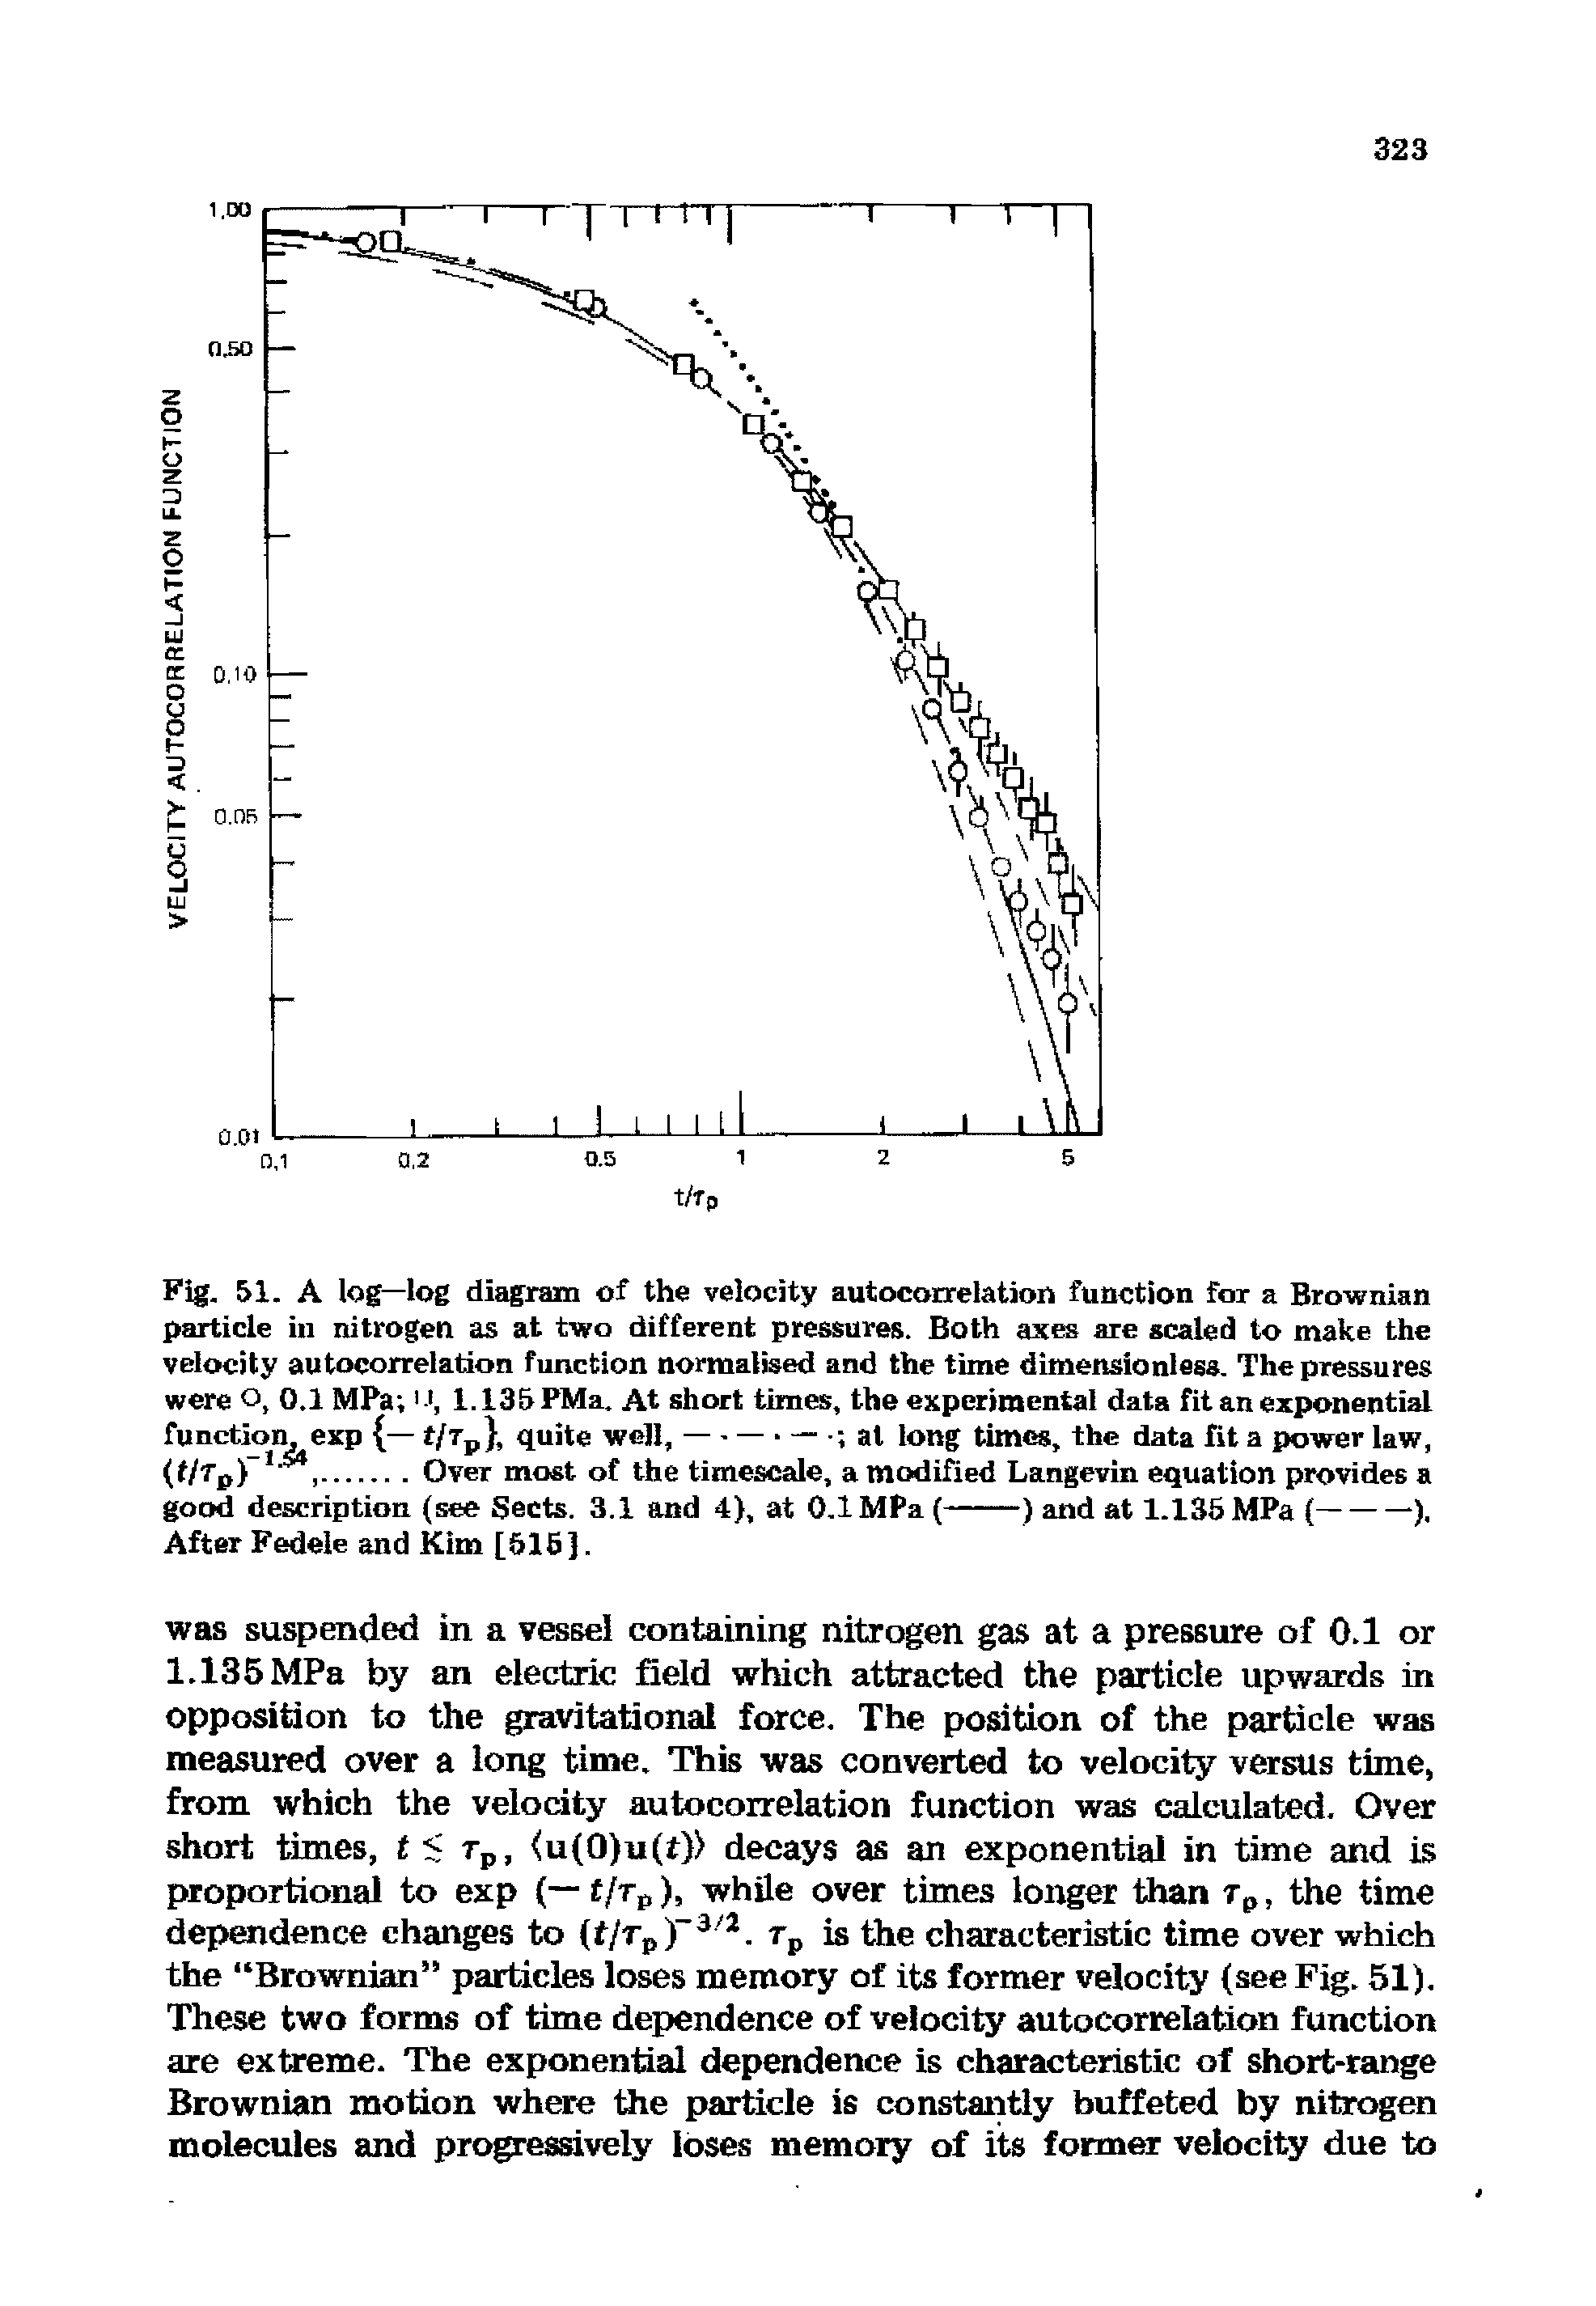 Fig. 51. A log—log diagram of the velocity autocorrelation function for a Brownian particle in nitrogen as at two different pressures. Both axes are scaled to make the velocity autocorrelation function normalised and the time dimensionless. The pressures were O, 0.1 MPa ", 1.135PMa. At short times, the experimental data fit an exponential...